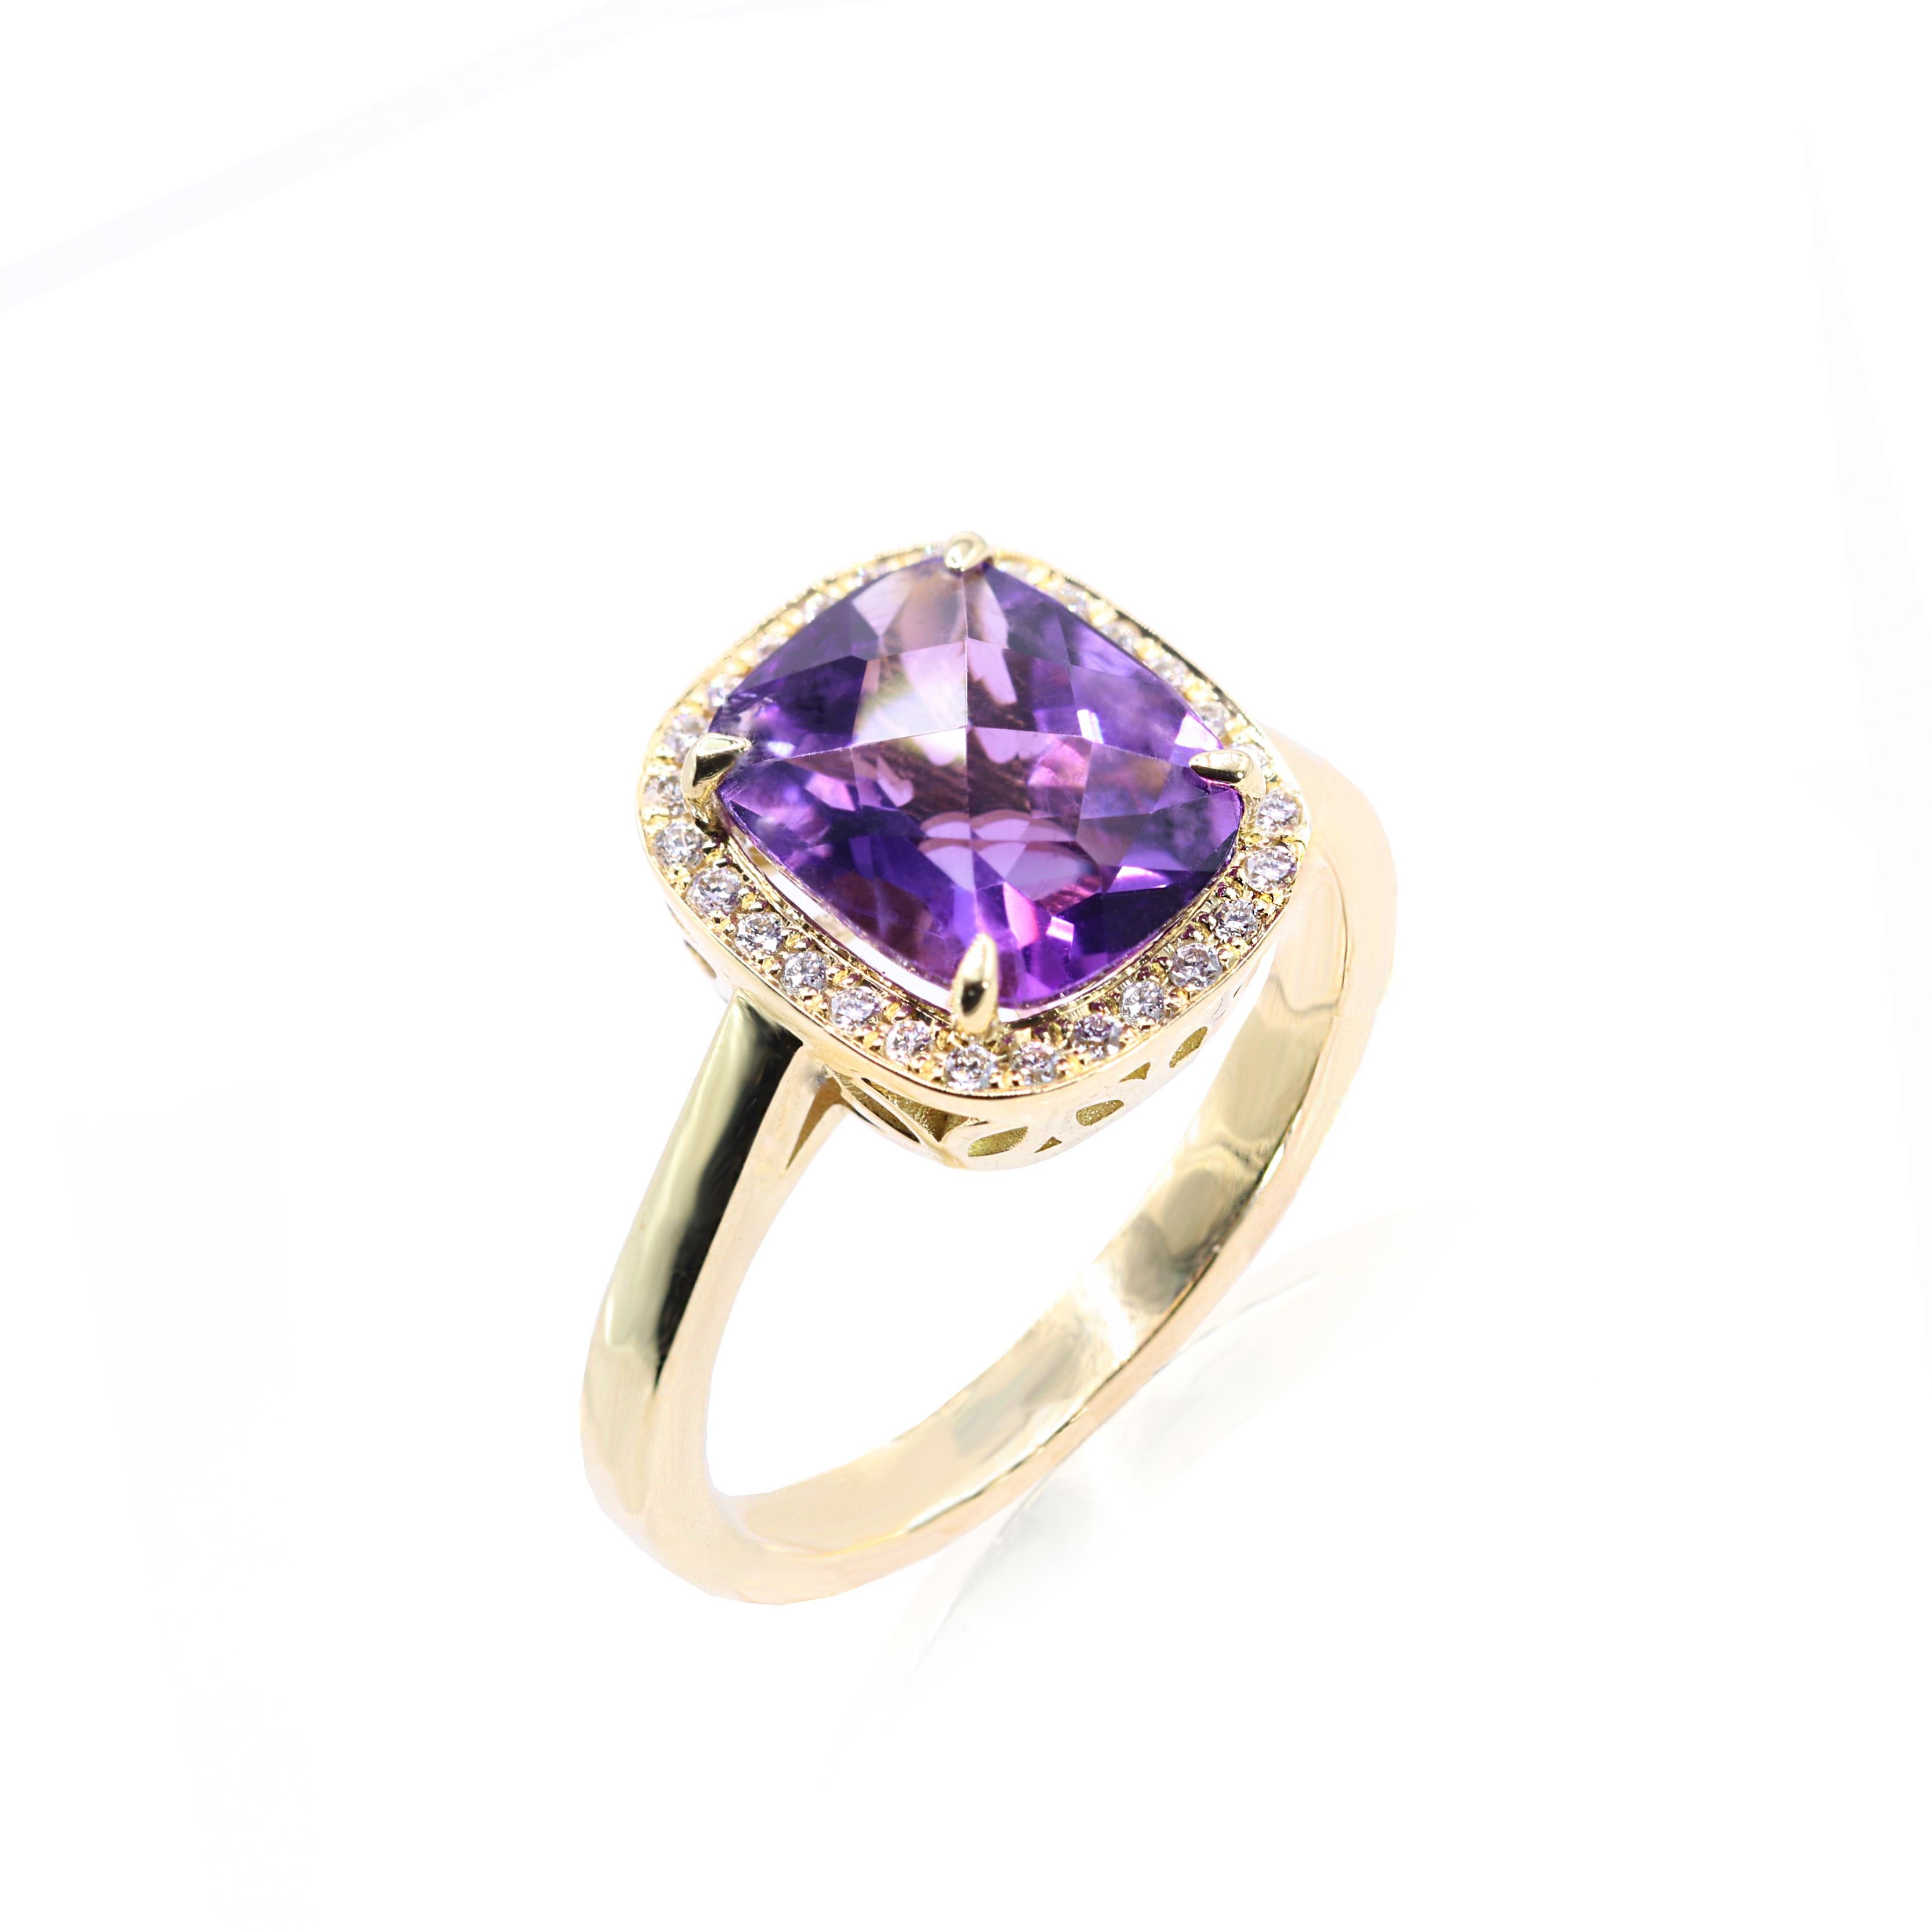 S.Georgios designer presents an oval shape 2.57 Carats Amethyst ring with a White Diamond Bezel with a total weight of 0.15 Carats. This simple yet stunning ring is handmade from 18 Karat Yellow Gold in Athens Greece. The ring features a beautiful